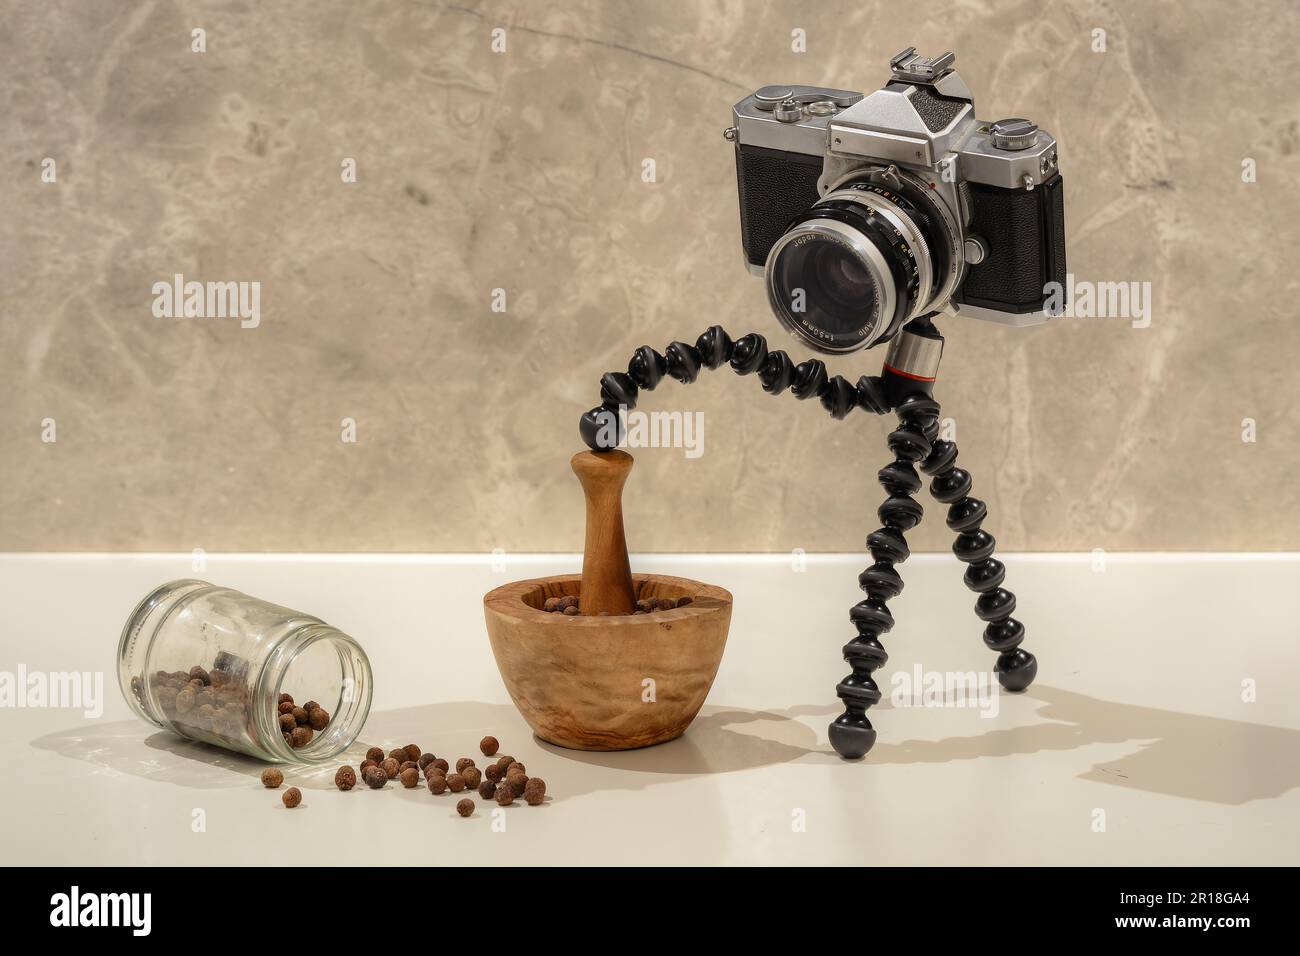 A photo of old analog film camera grinding spices with a wooden hand spice grinder Stock Photo